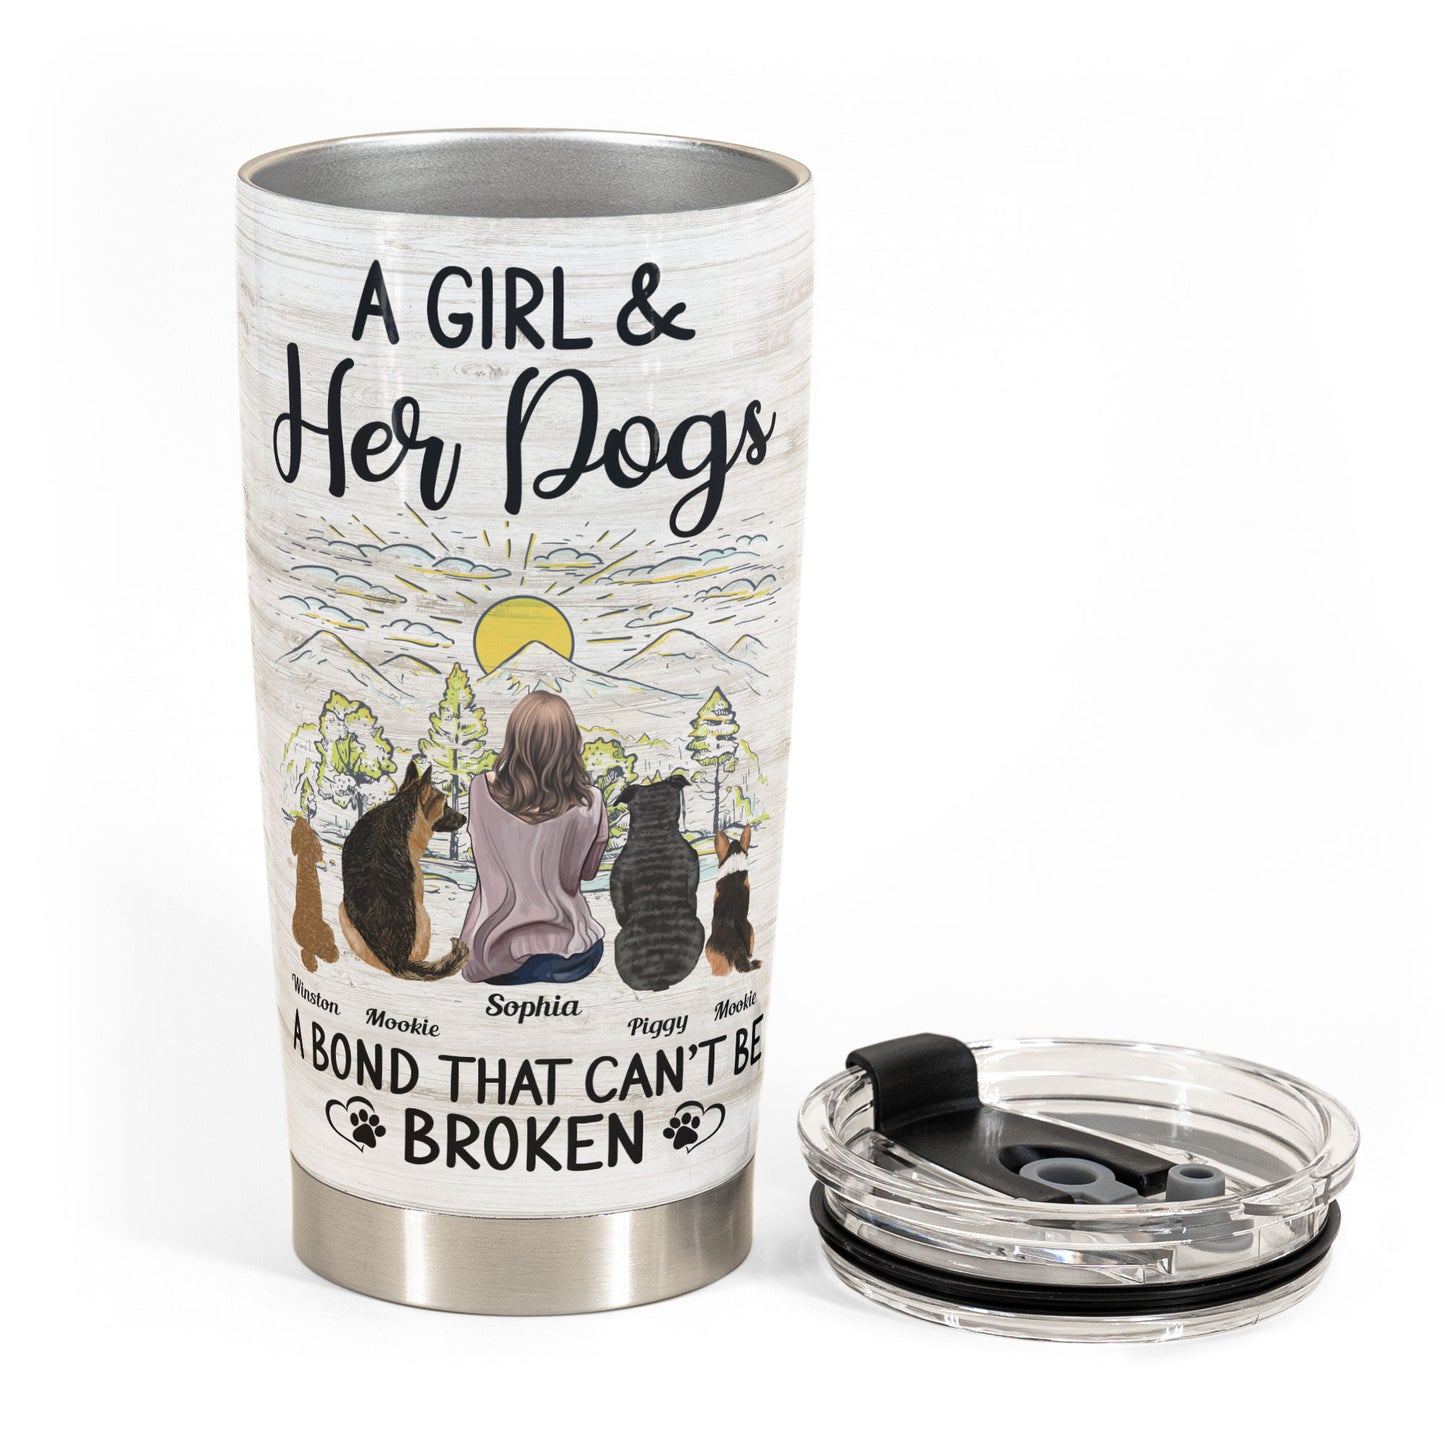 Girl And Her Dogs - A Bond That Can'T Be Broken  - Personalized Tumbler Cup - BirthdayGift For Girl, Woman, Dog Mom, Dog Mama, Fur Mama, Dog Lover, Dog Owner